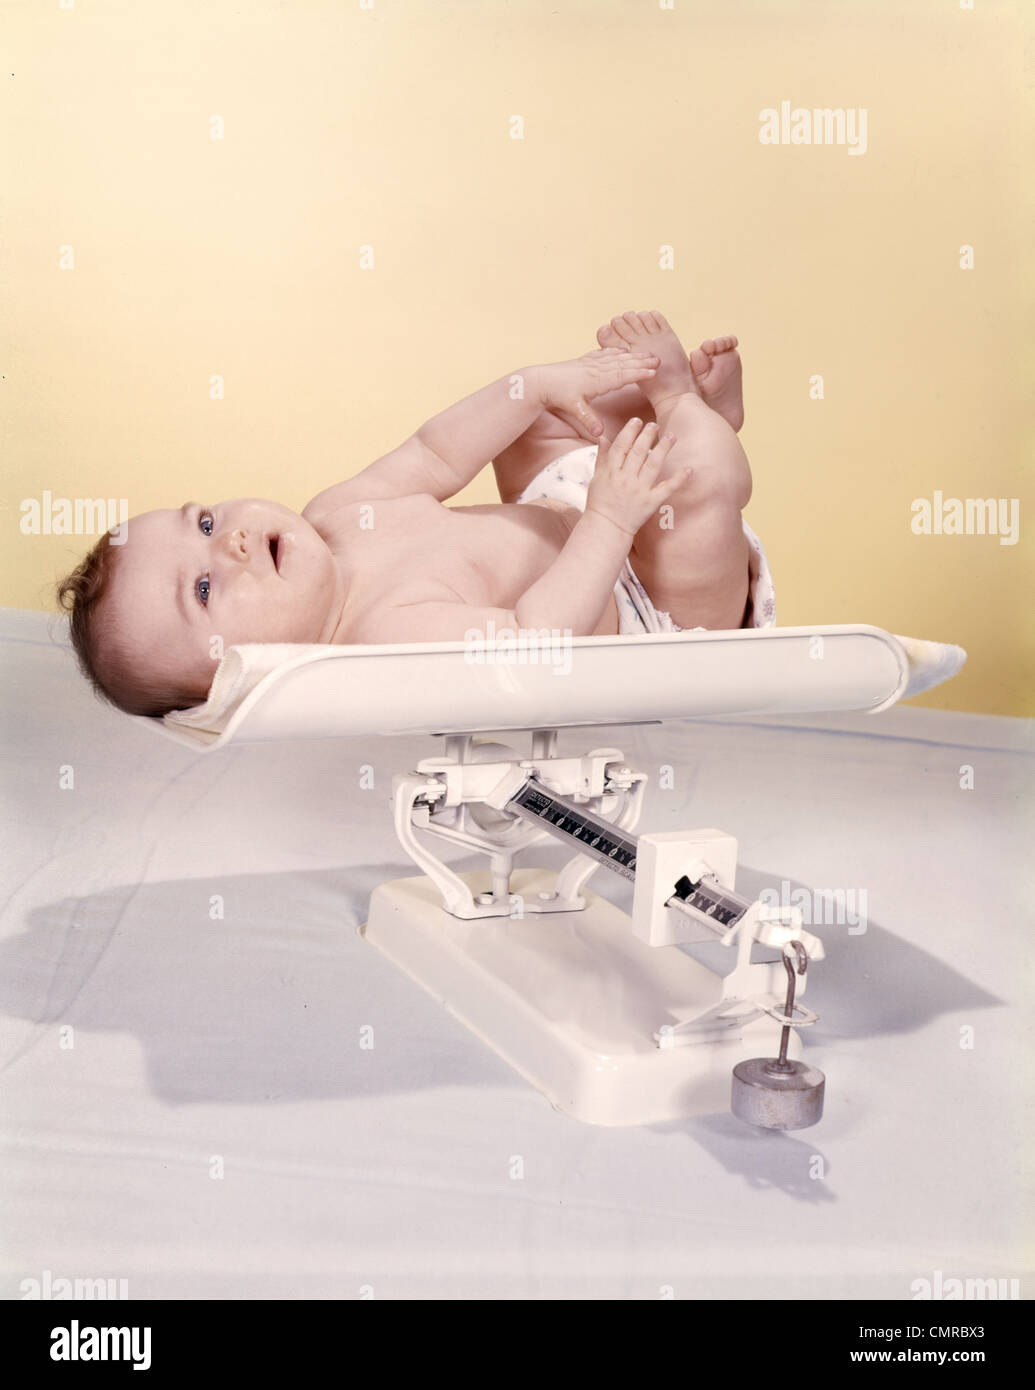 Années 1950 Années 1960 SMILING BABY LYING ON WEIGHT SCALE Banque D'Images